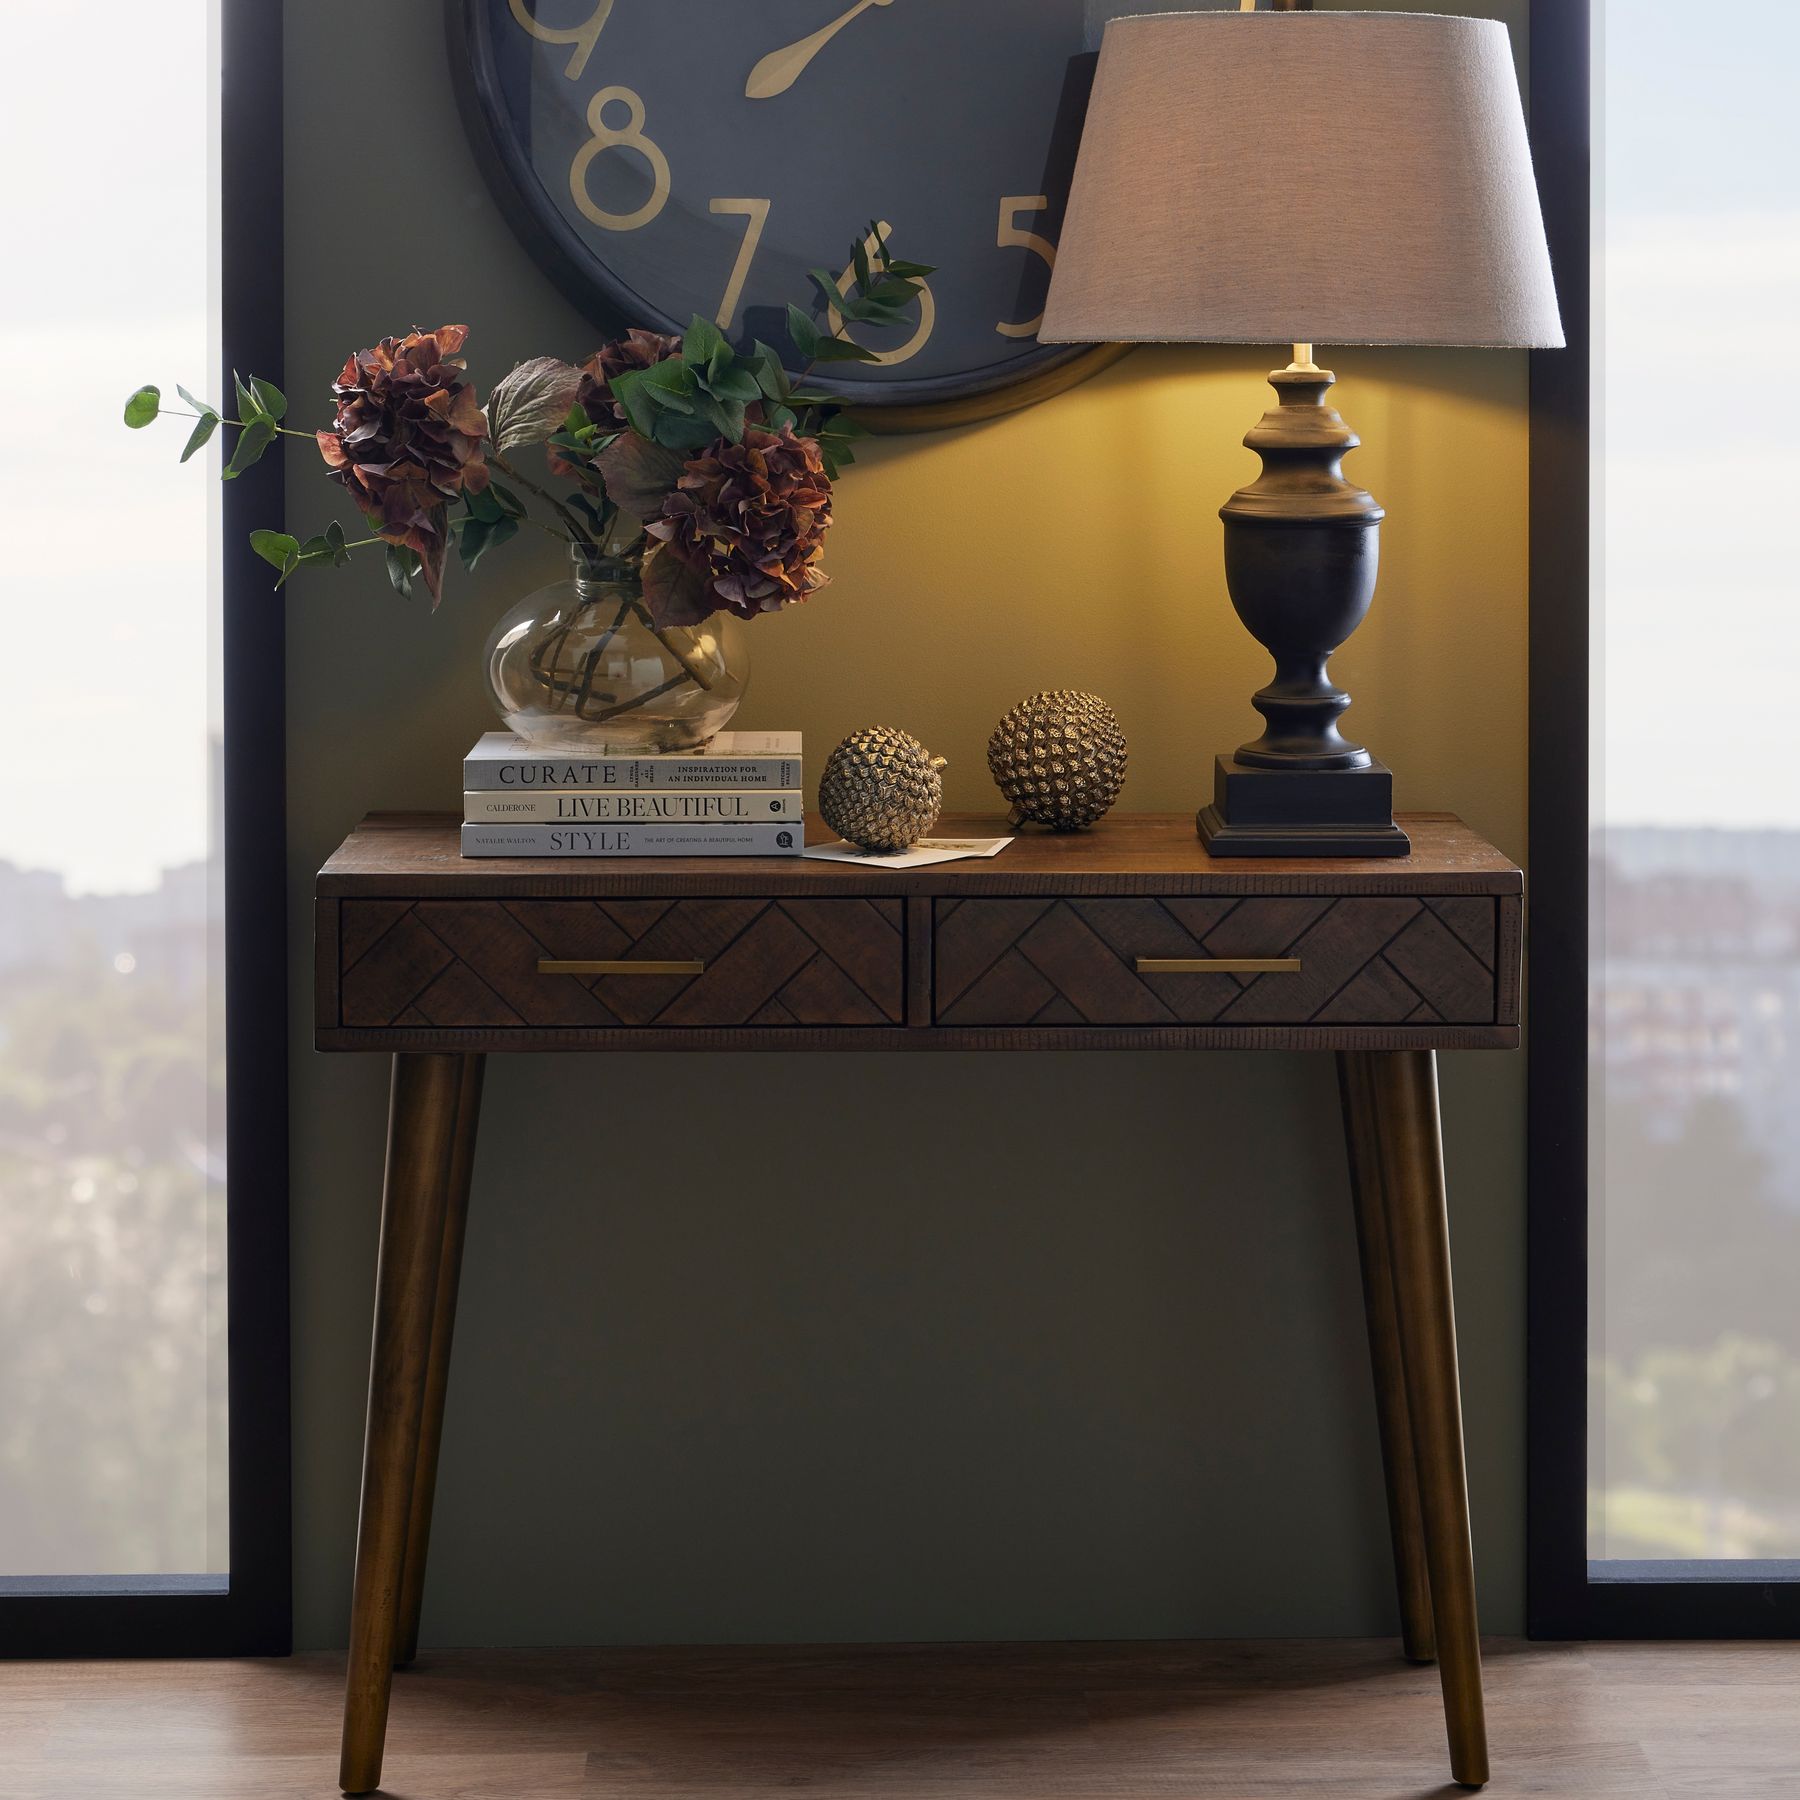 Havana Gold 2 Drawer Console Table - Image 3